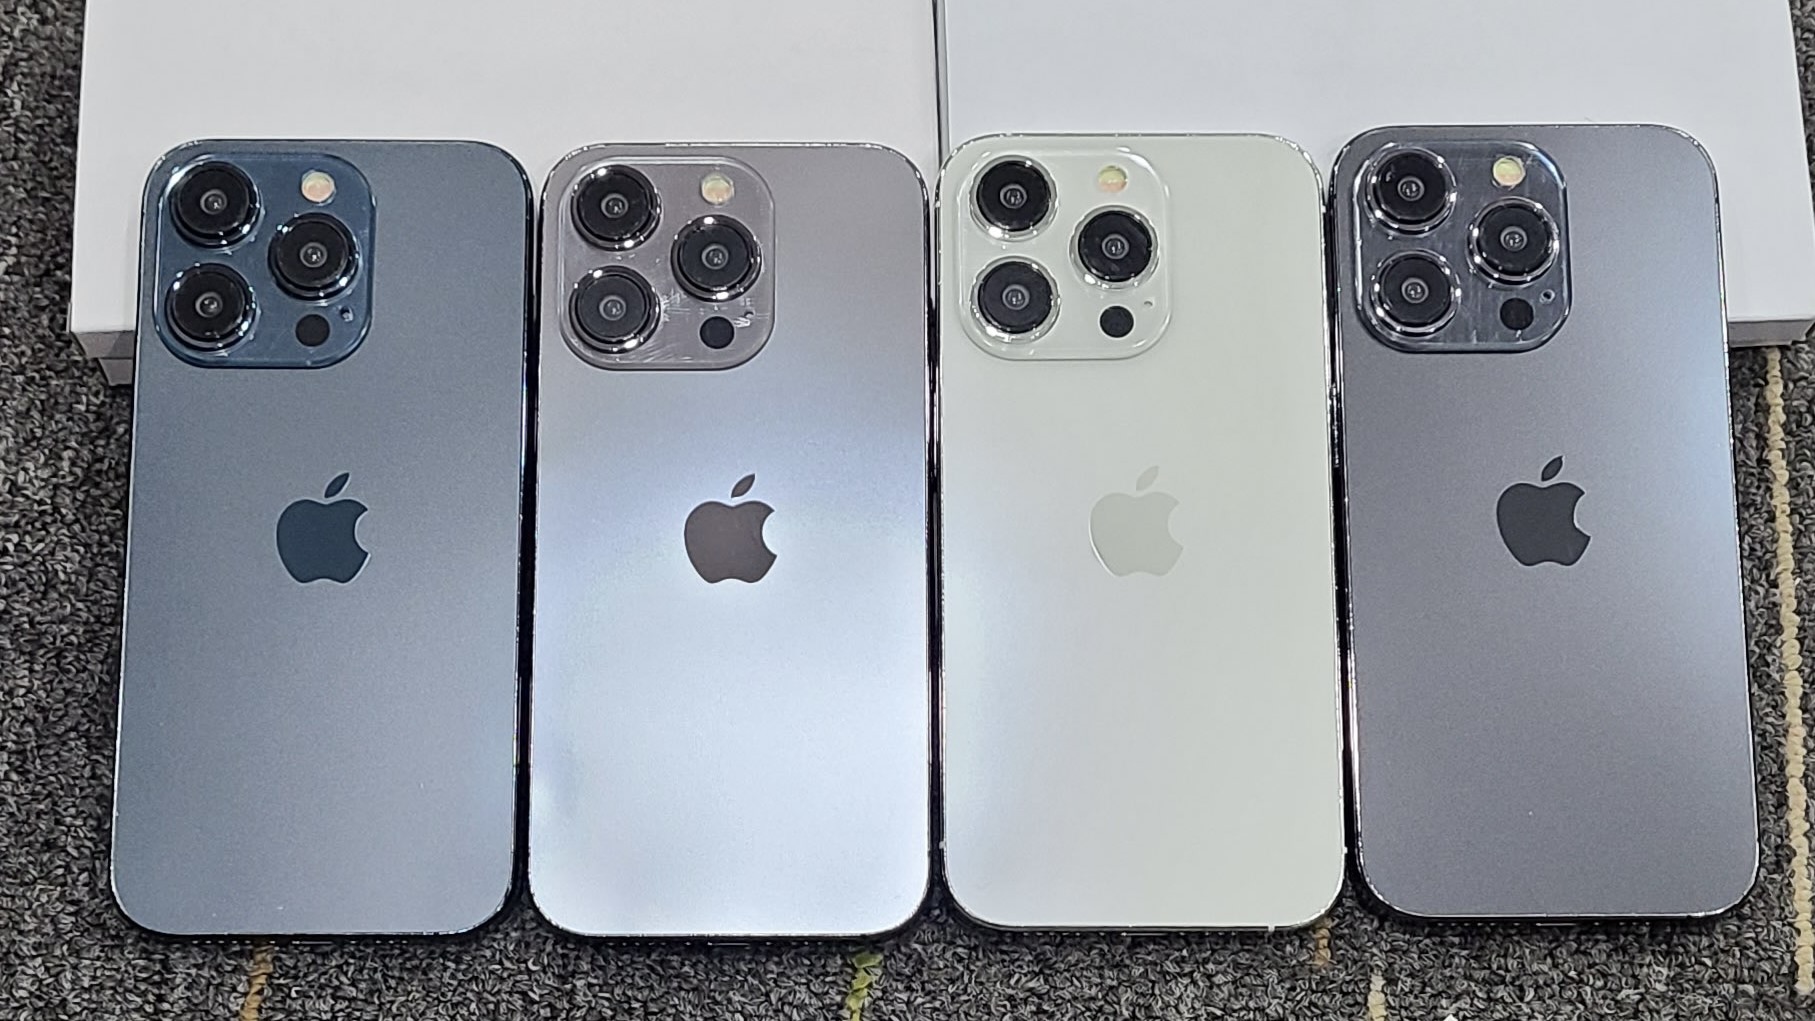 iPhone 15 Colors: Which One Should You Pick?